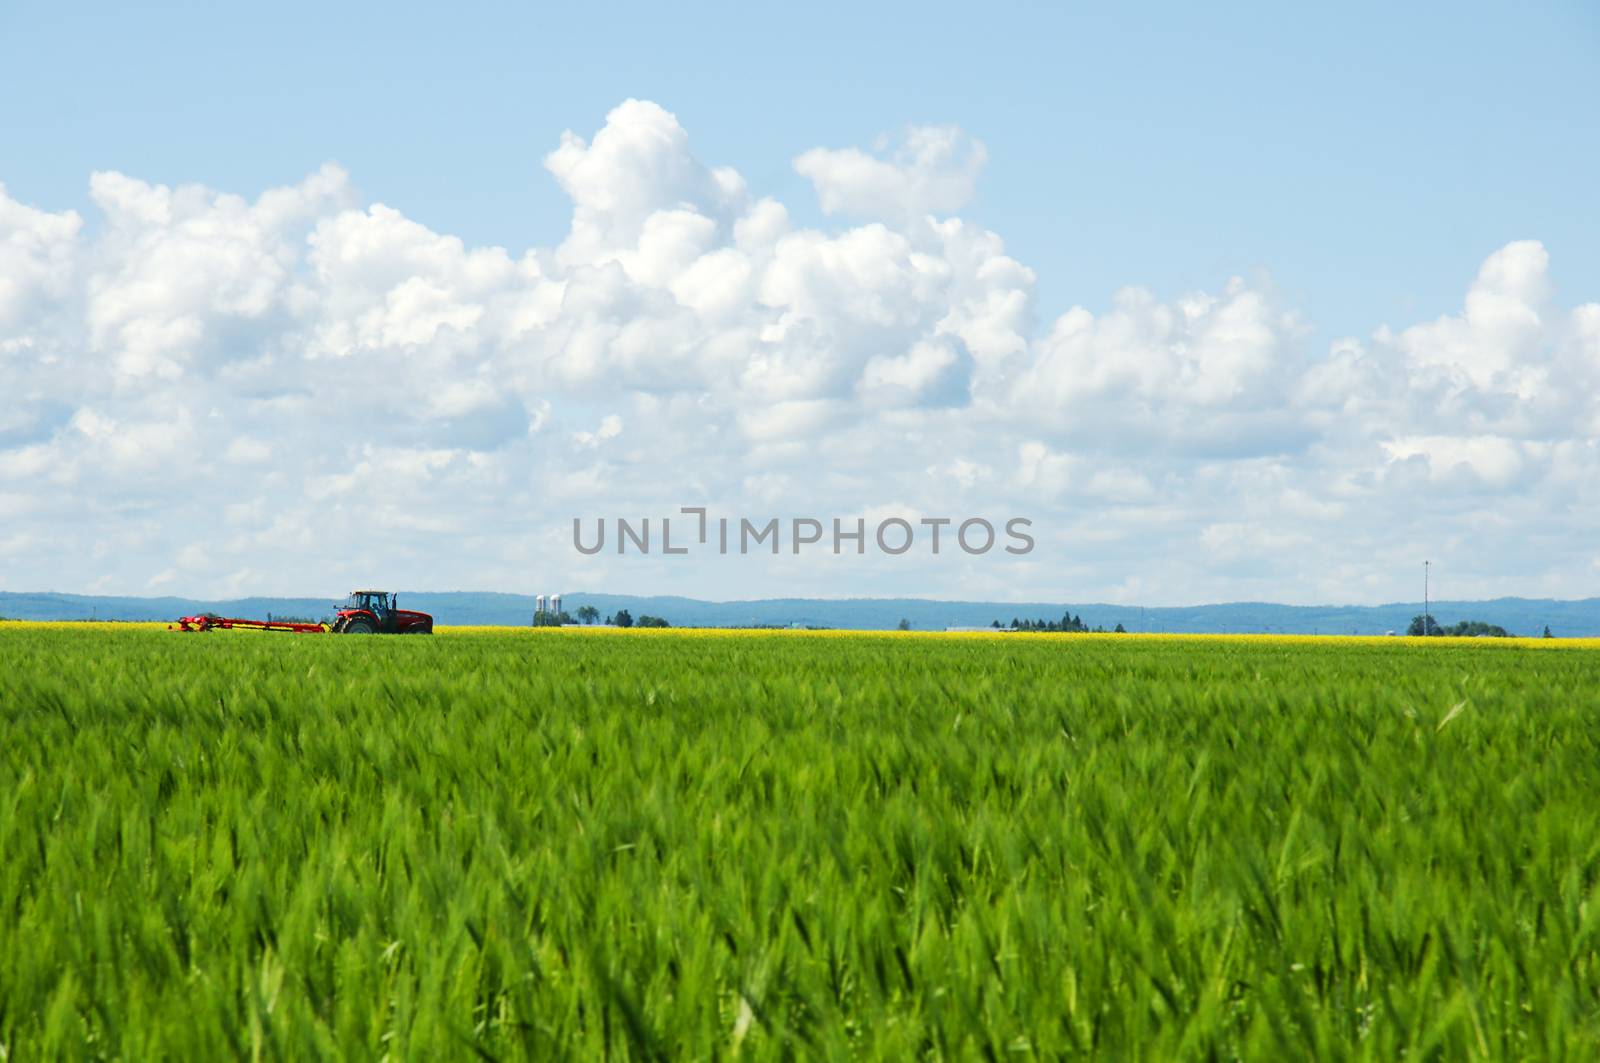 Rural landscape, focus on red tractor, green wheat field front and yellow canola field with sky